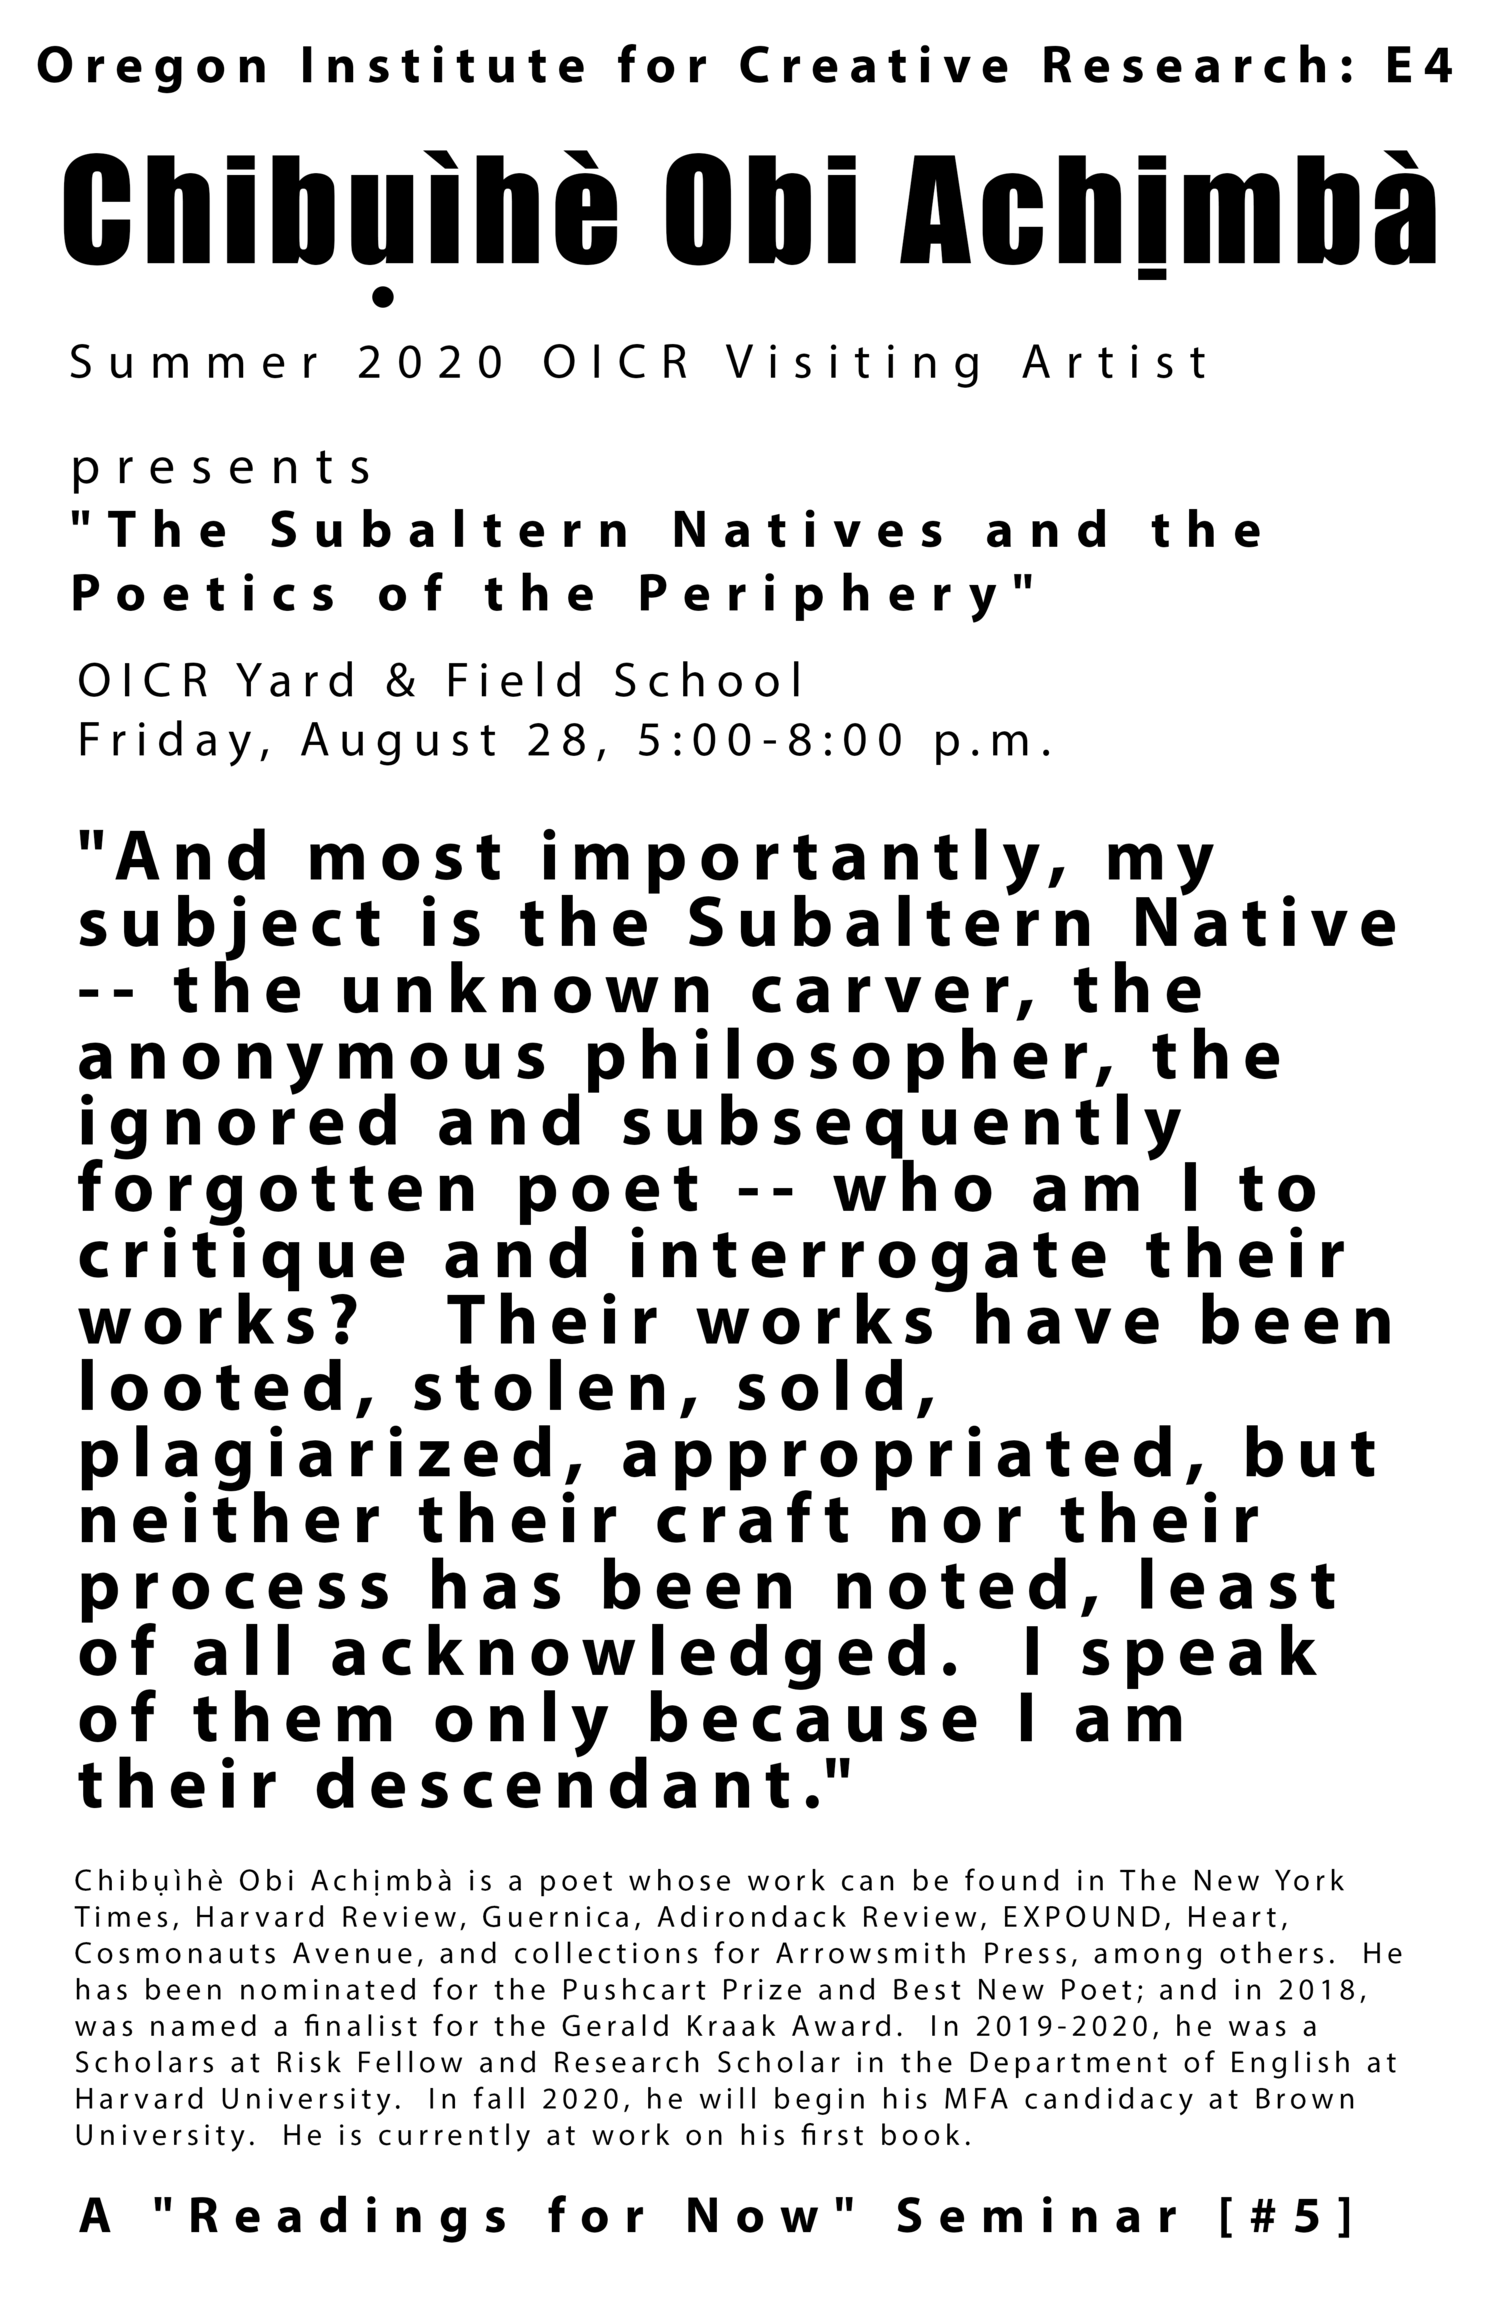 #5: The Subaltern Natives and the Poetics of the Periphery 